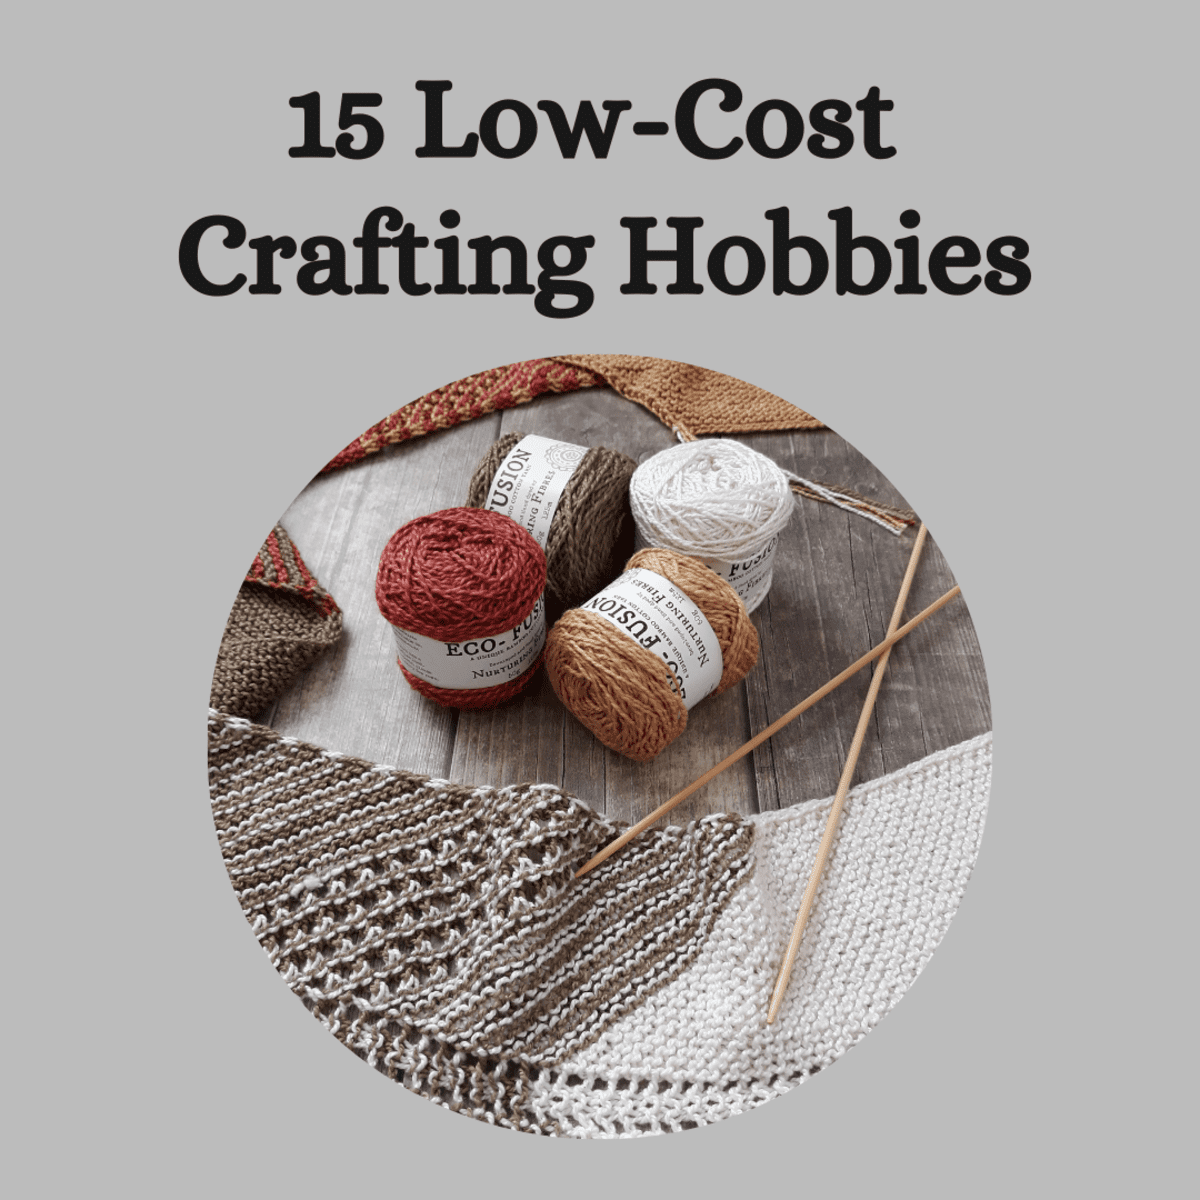 15 Unique Craft Kits for Adults  Monthly crafts, Daily crafts